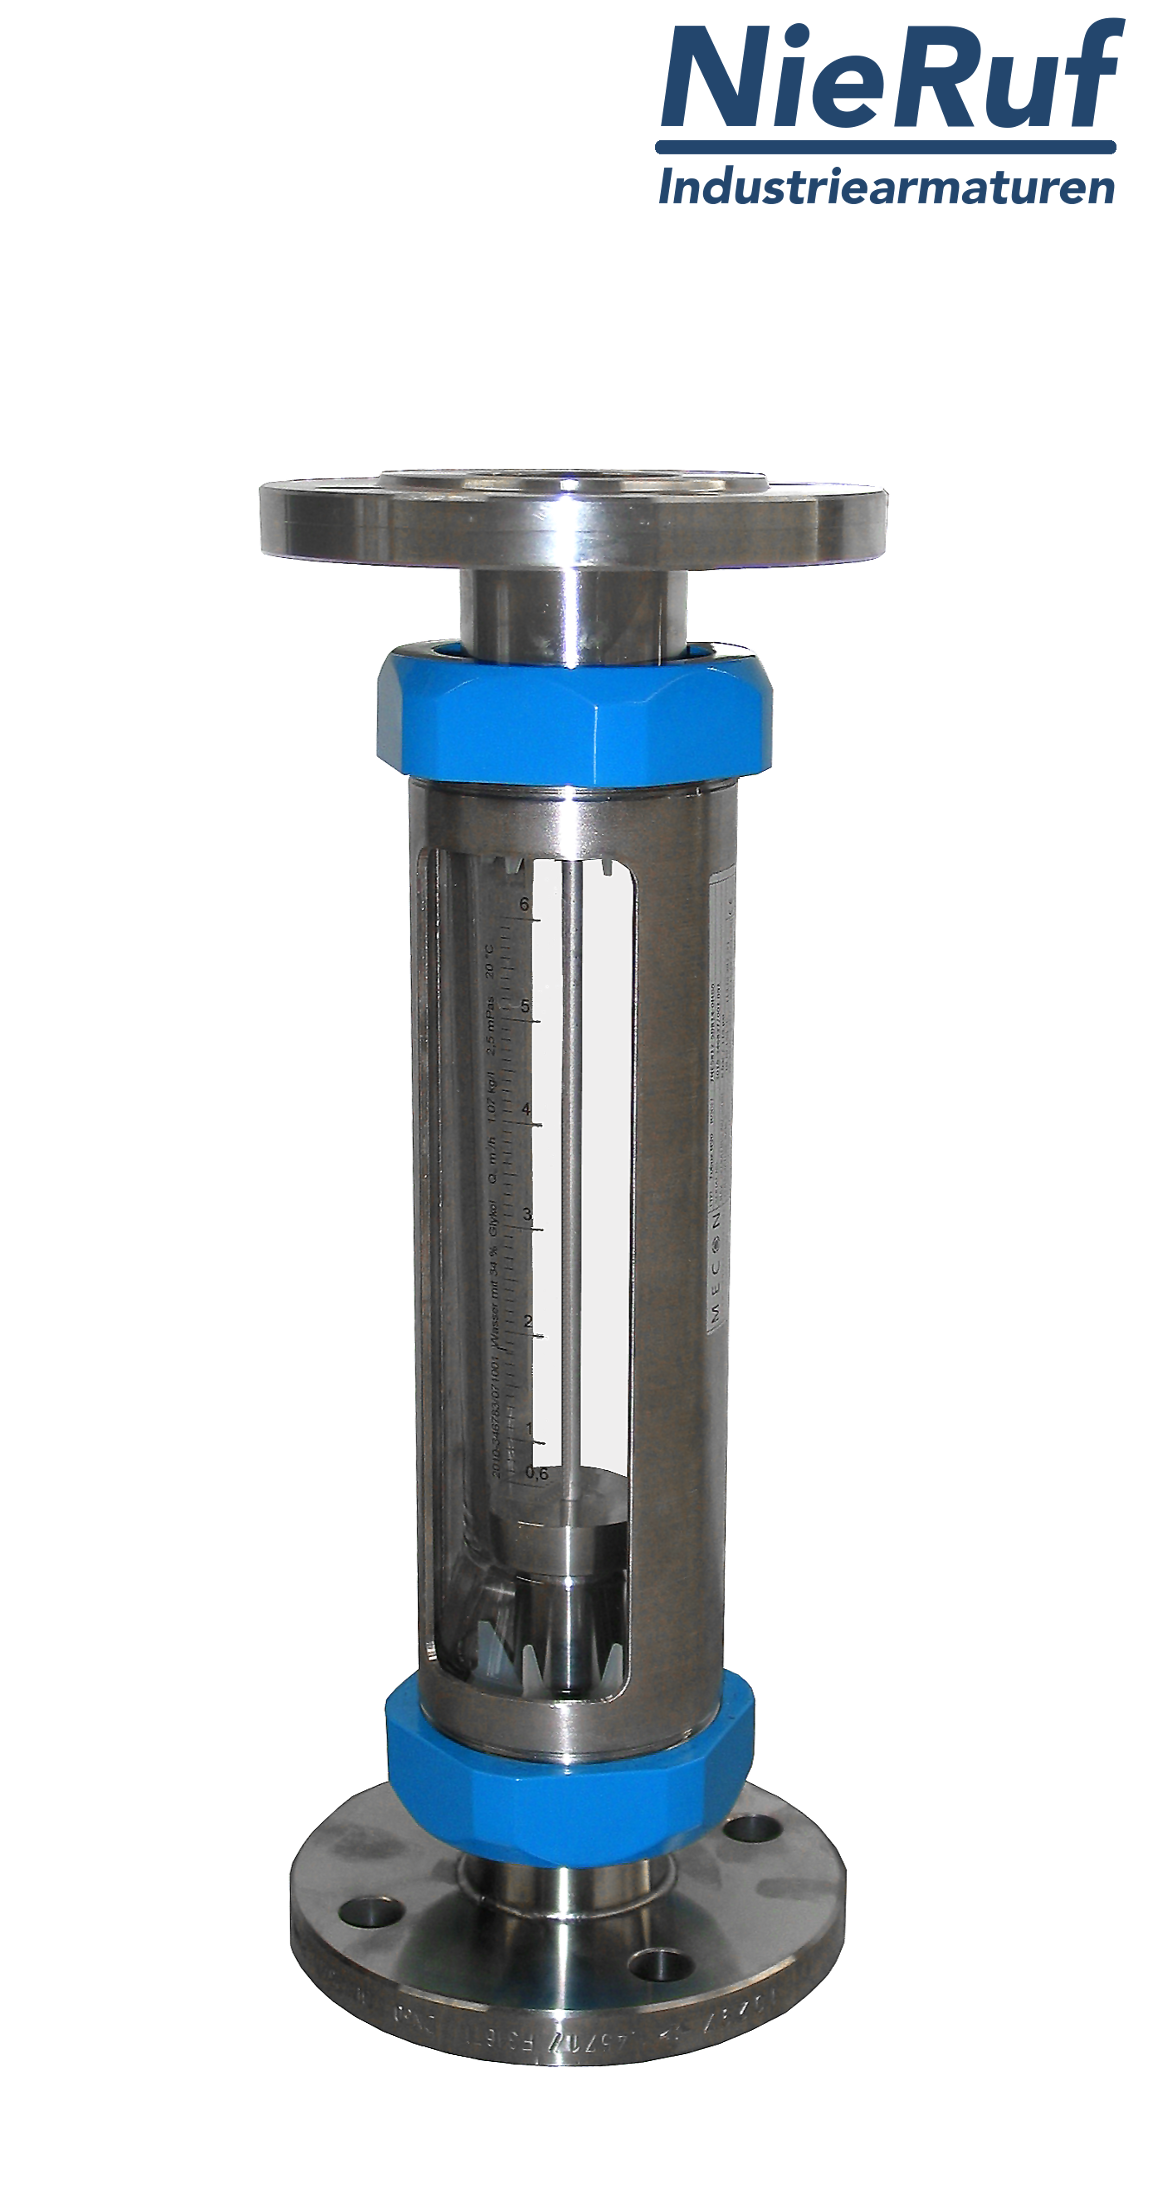 Variable area flowmeter stainless steel + borosilicate flange DN80 2000.0 - 12500 l/h water FKM